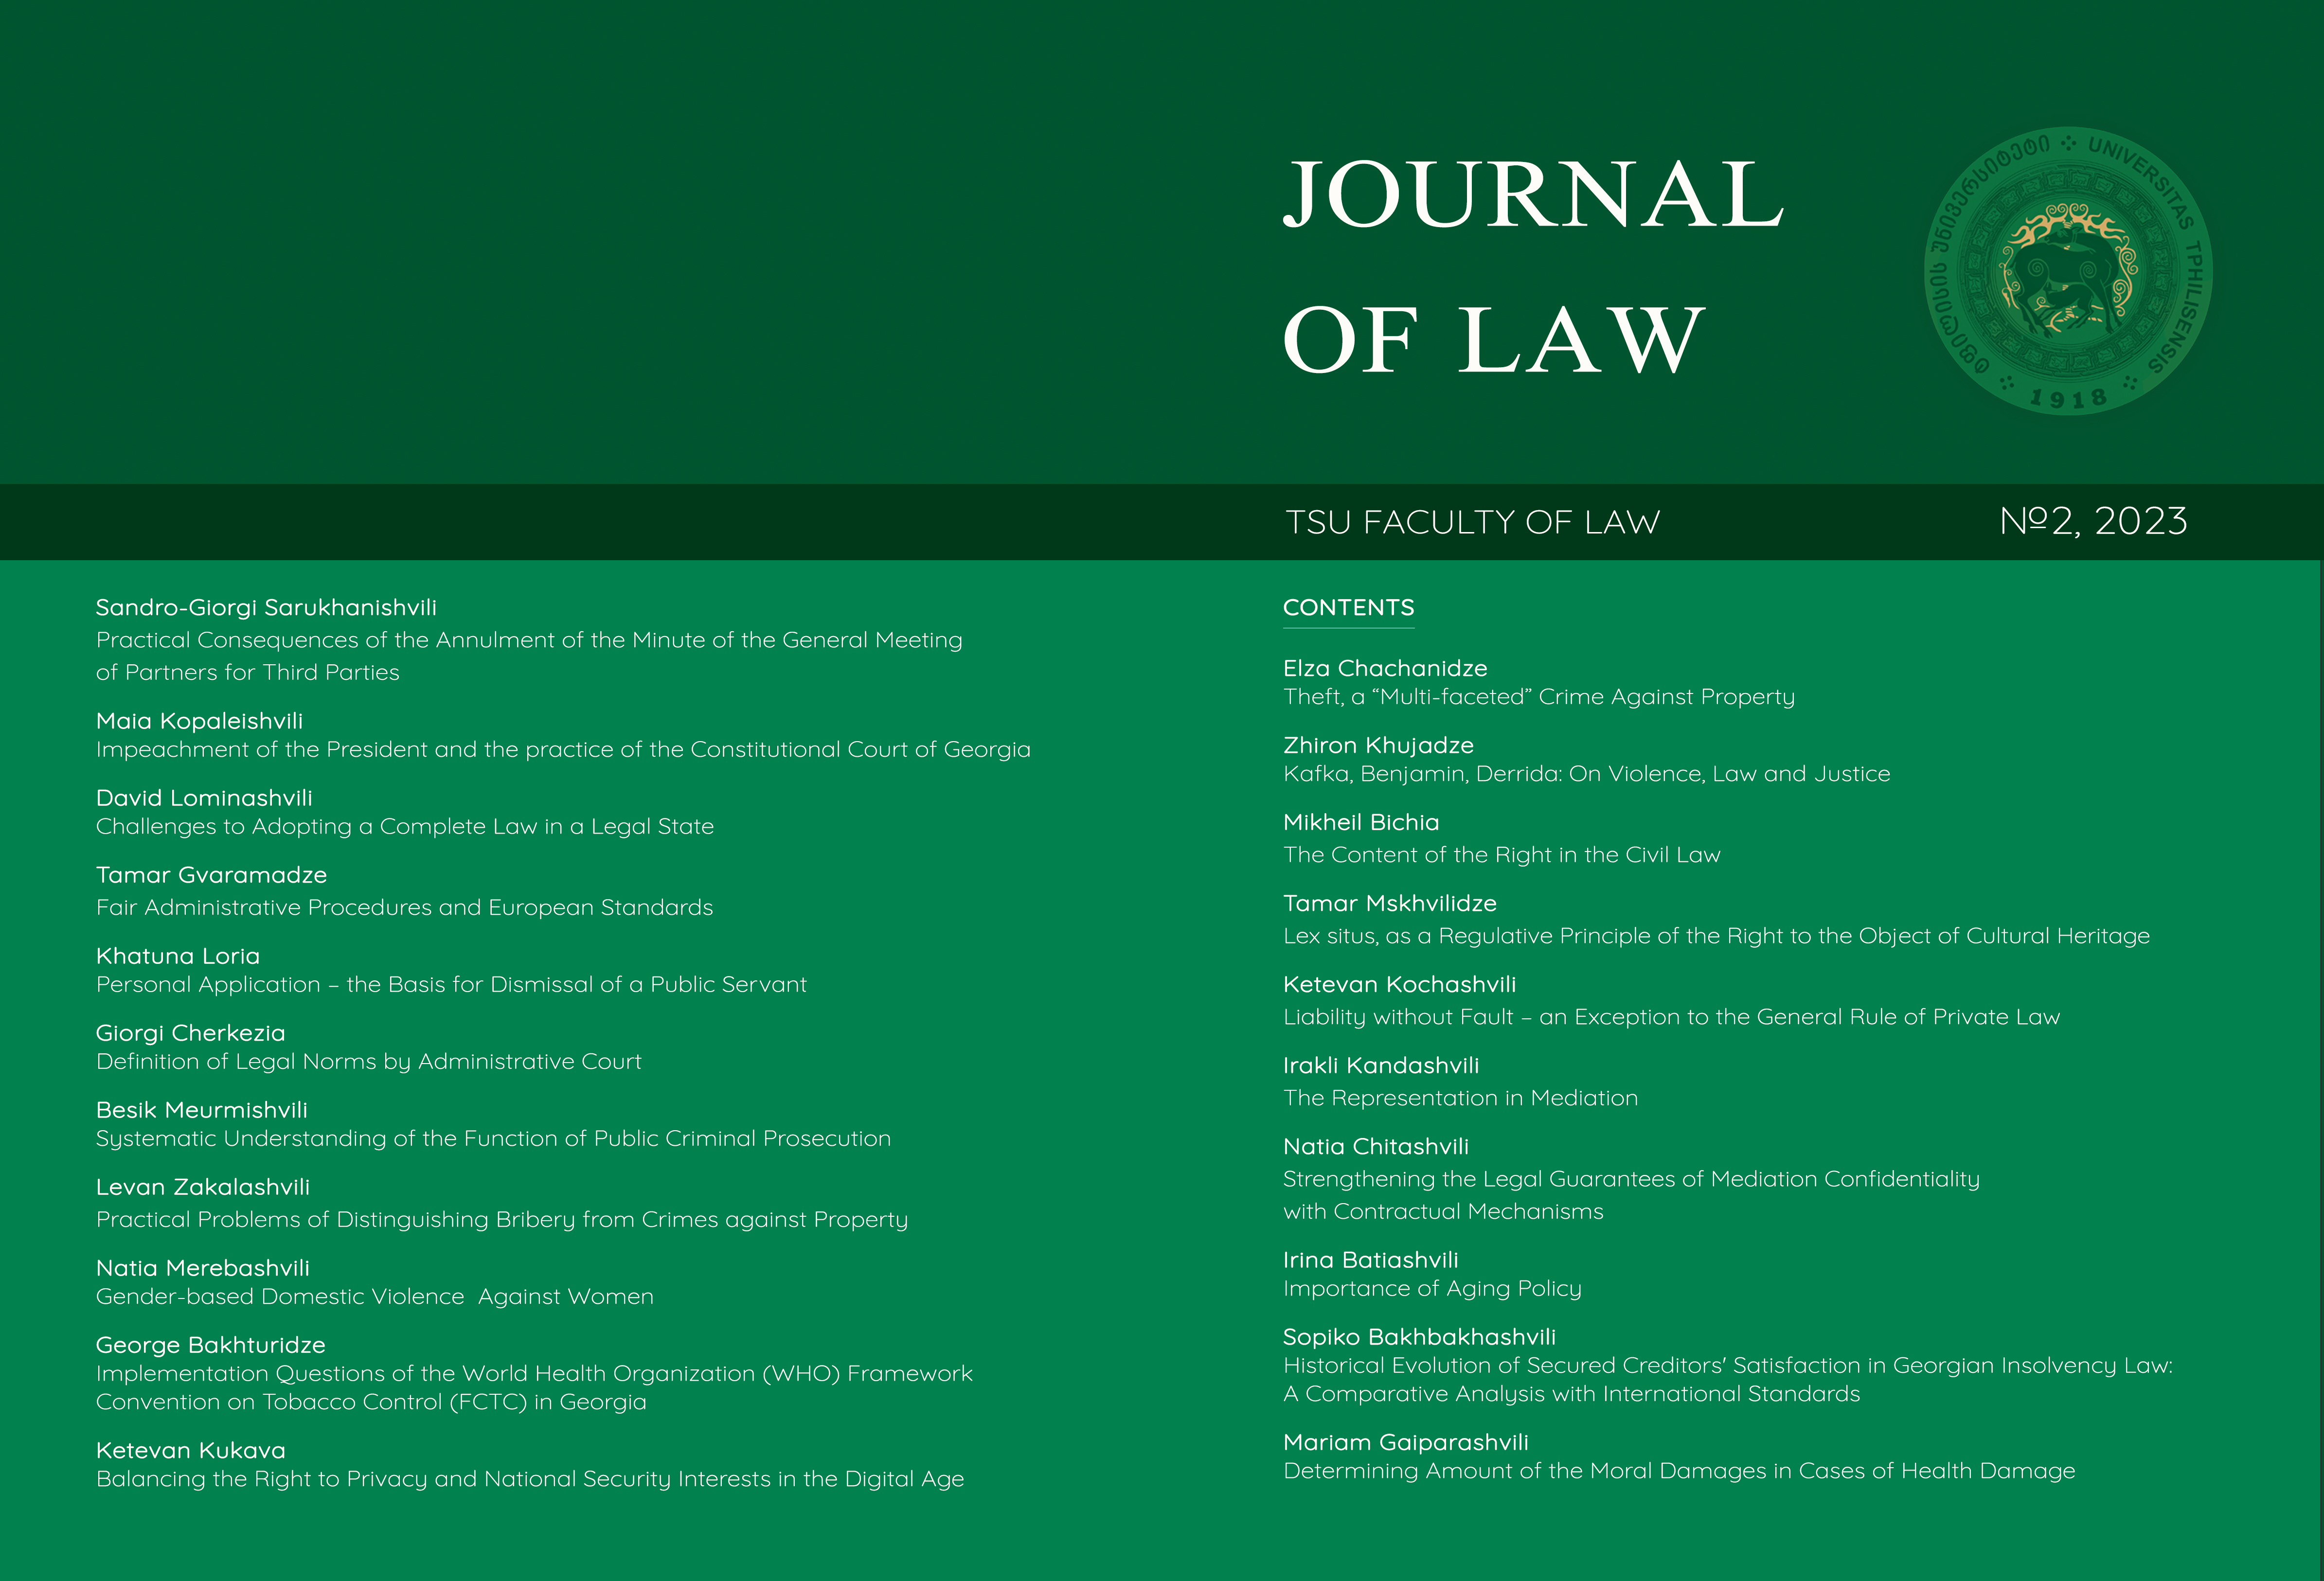 					View No. 2 (2023): Journal of Law
				